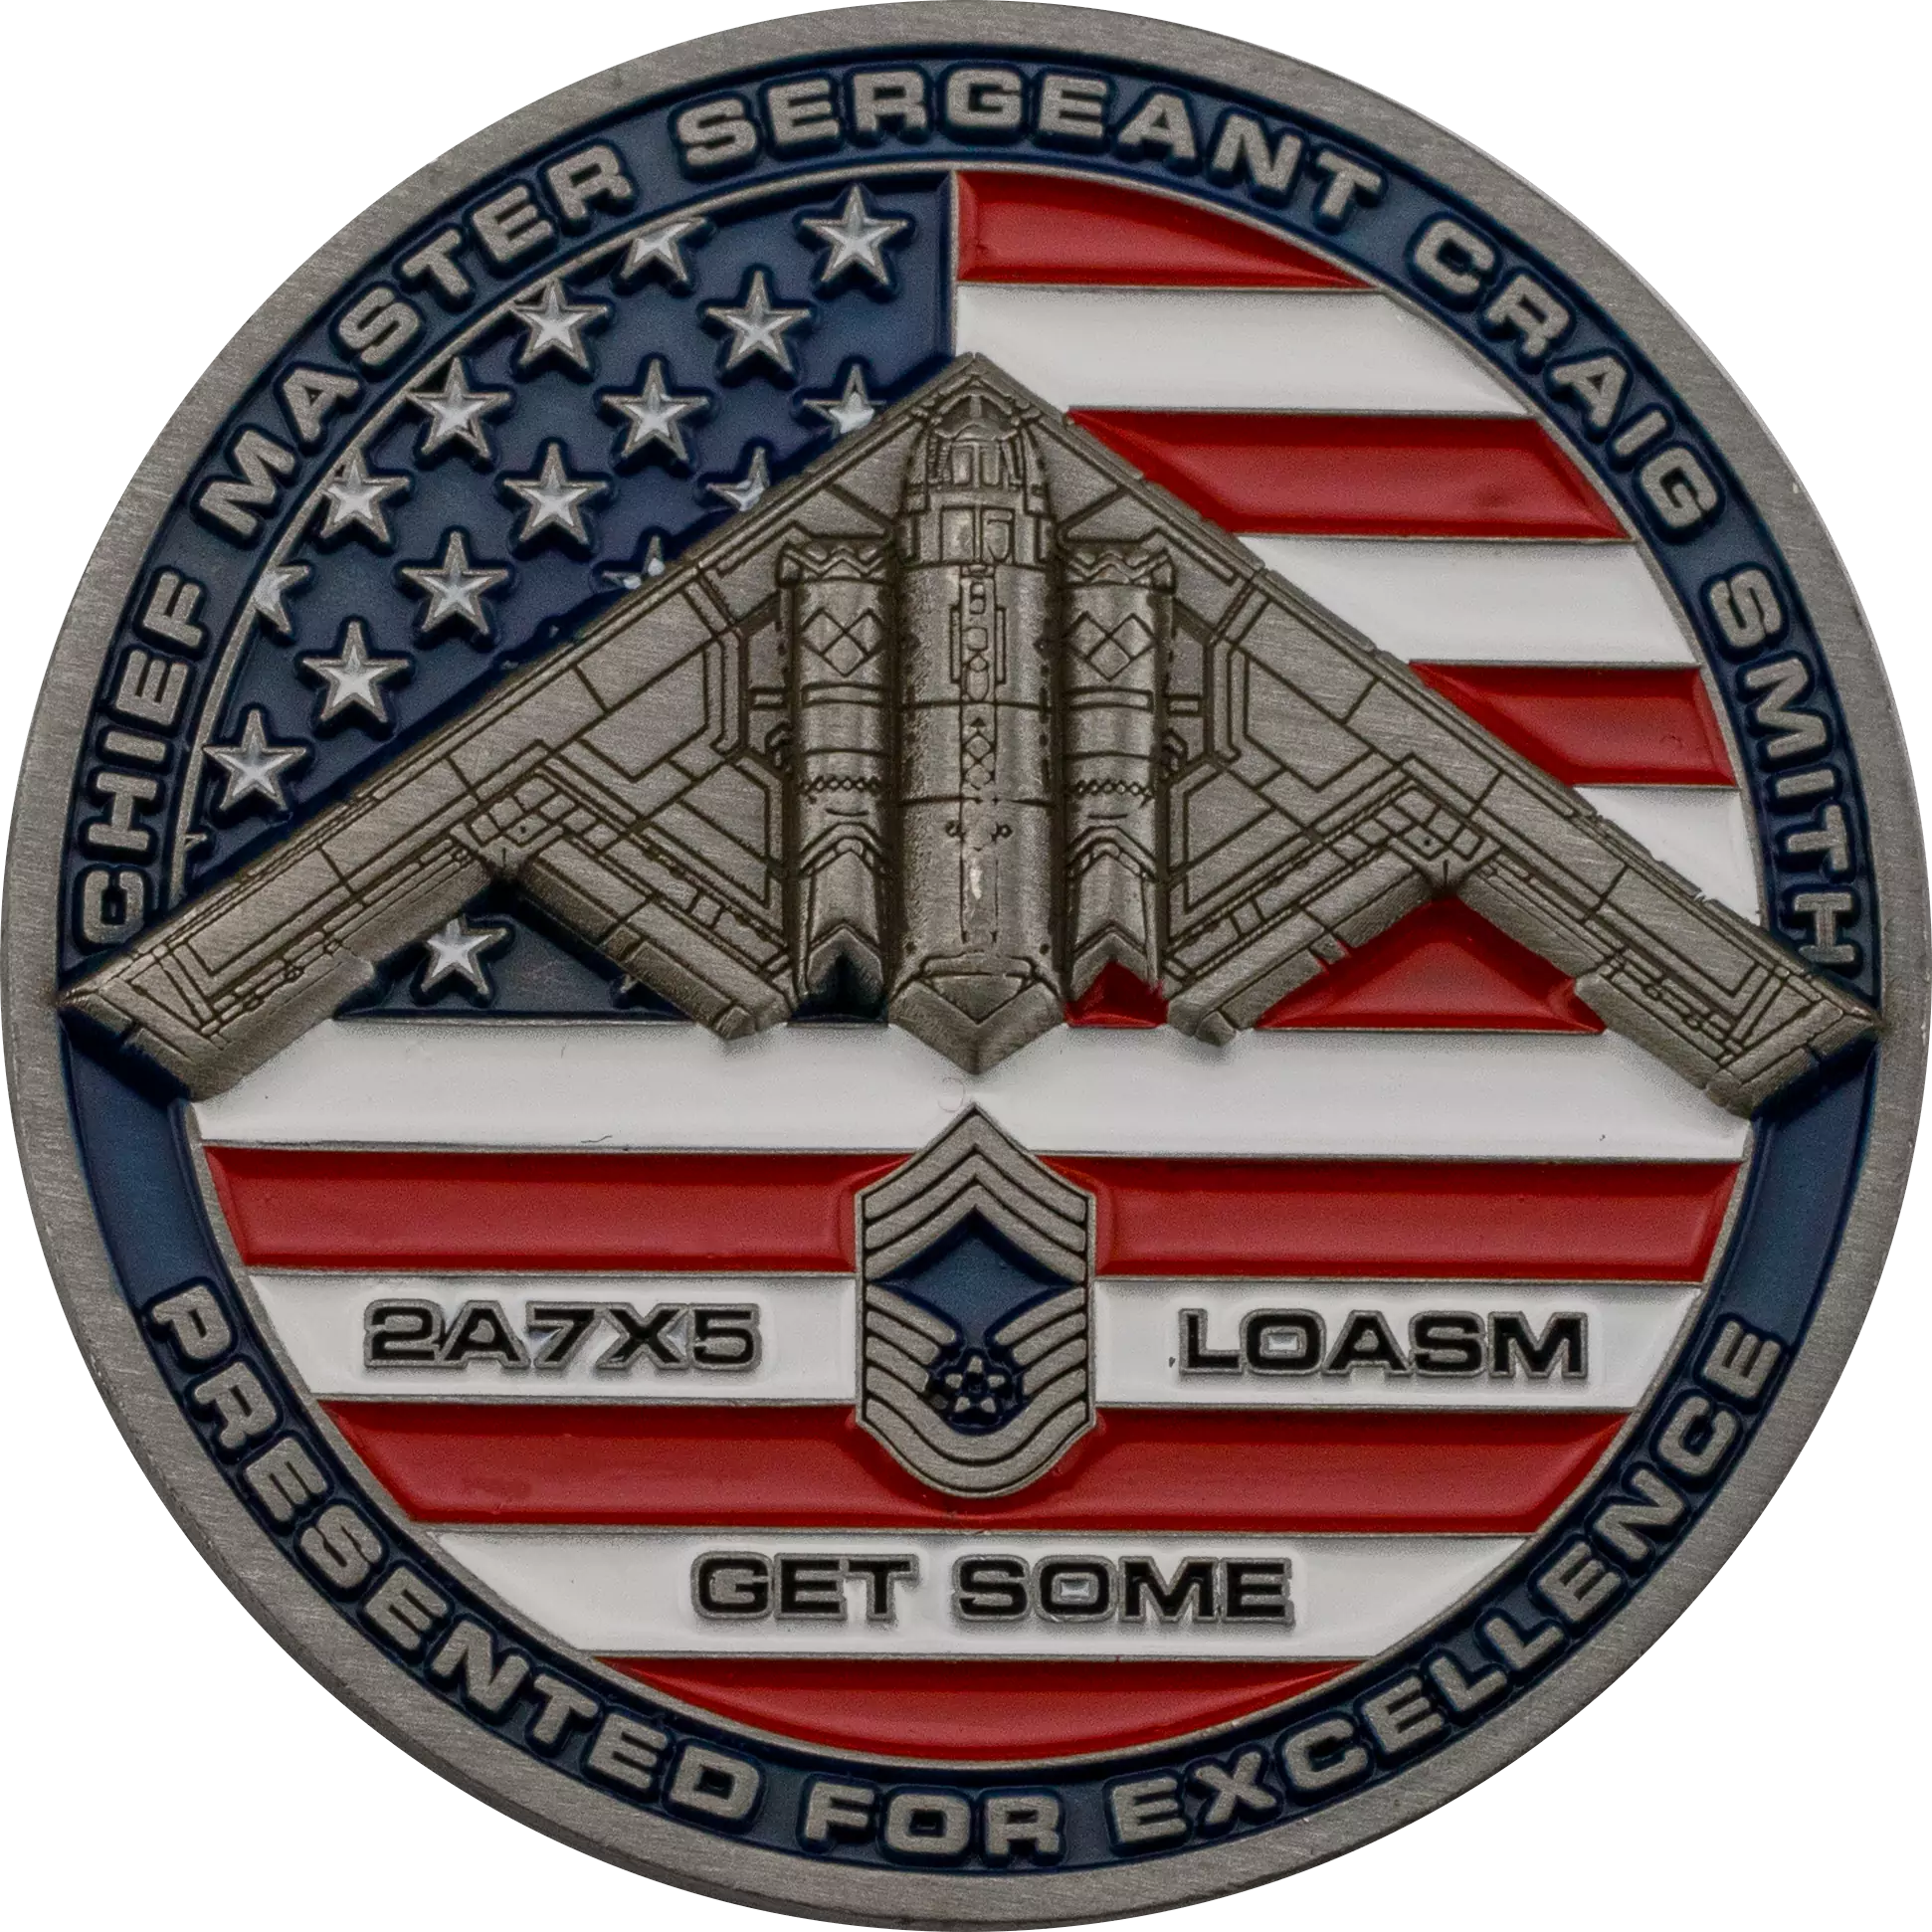 challenge coins, custom challenge coins, air force challenge coins, challenge coins 4 less, challenge coins 4 u, best challenge coin company, coins of excellence